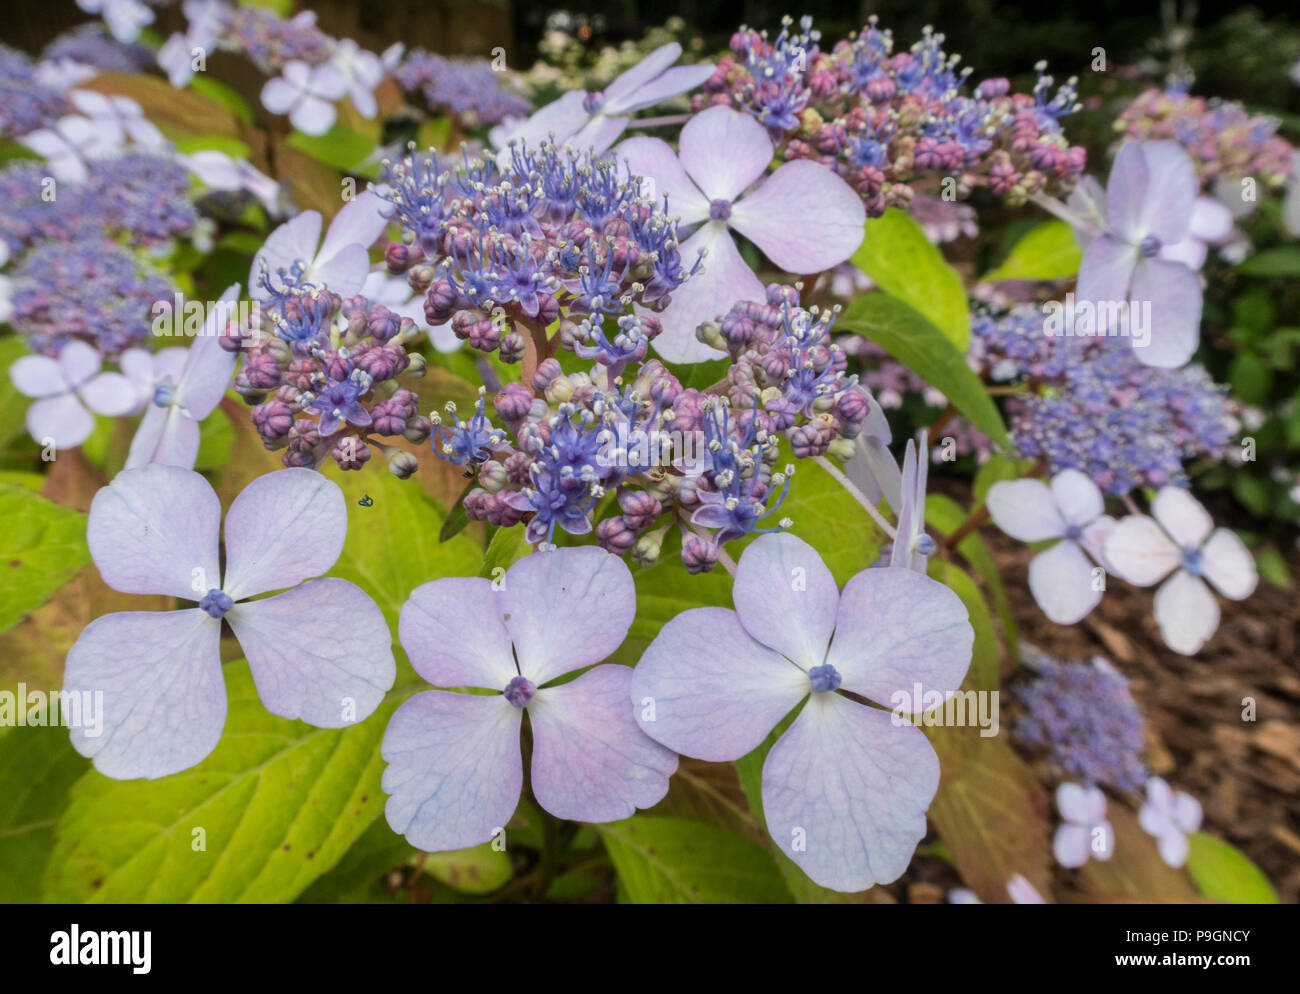 Lacecap hydrangea macrophylla Mariessi Perfecta, normally blue, but here in pink due to soil alkalinity. Stock Photo